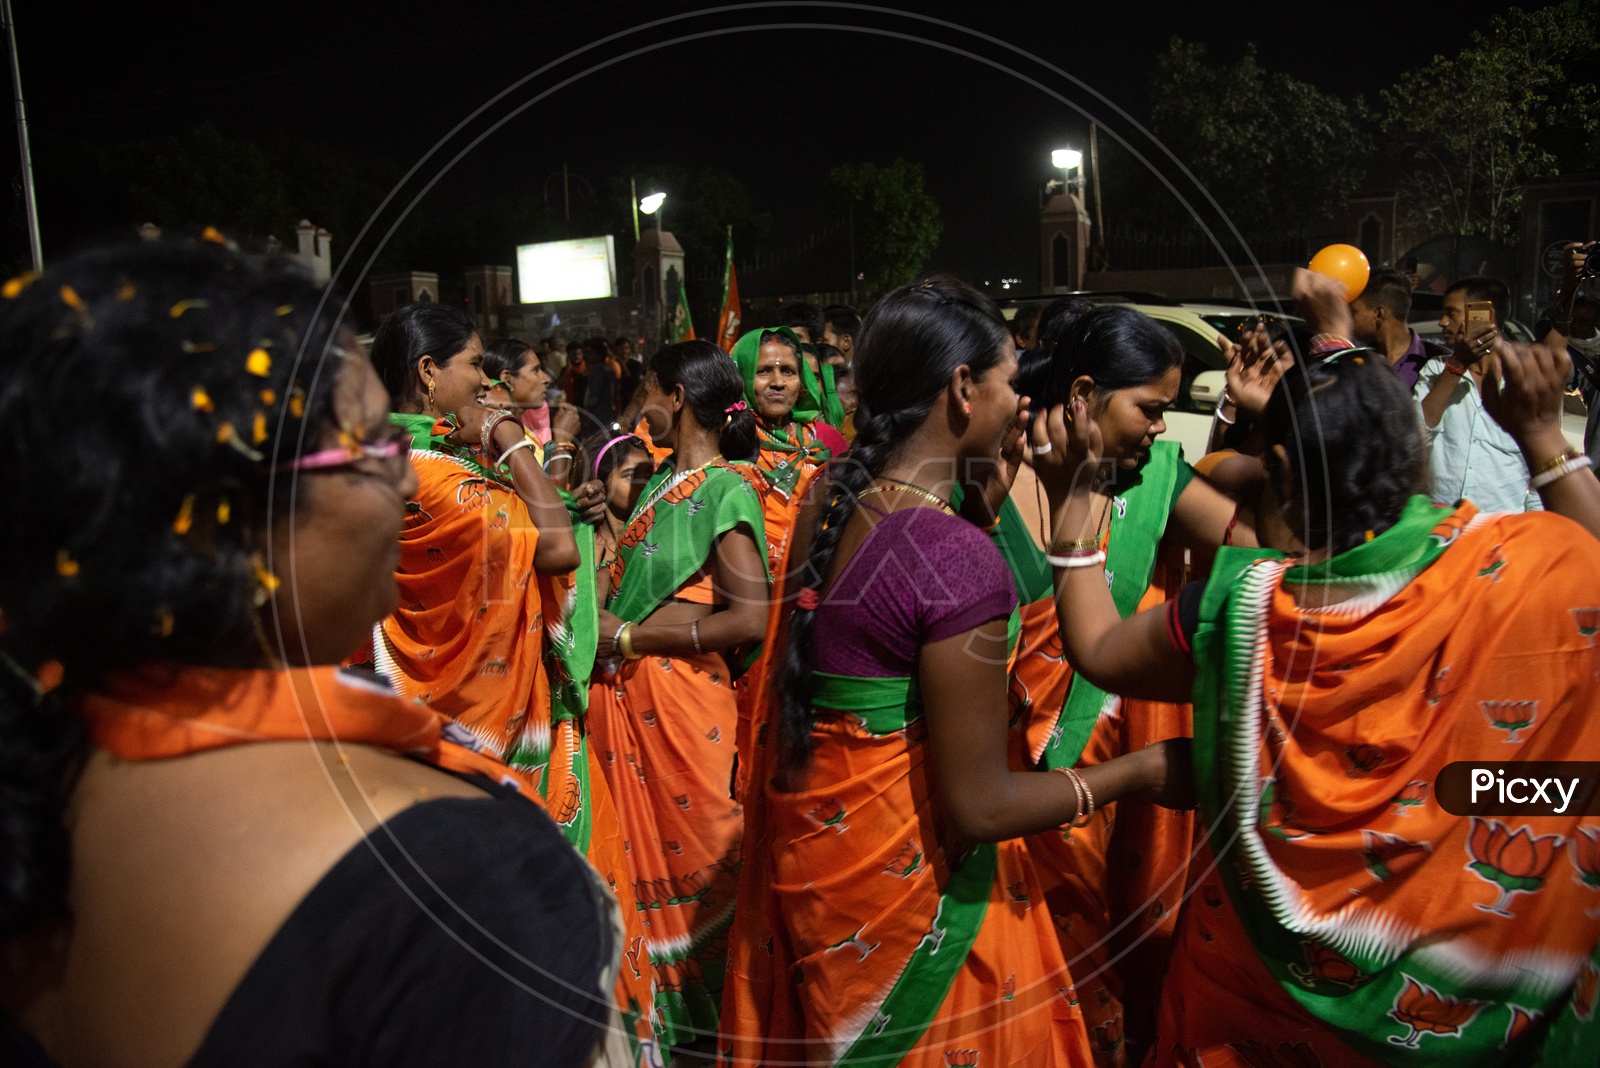 BJP Party Workers Or Supporters  or Karyakathas  Wearing The BJP Saris Or Sarees  During The Election Campaign Or  Party meetings